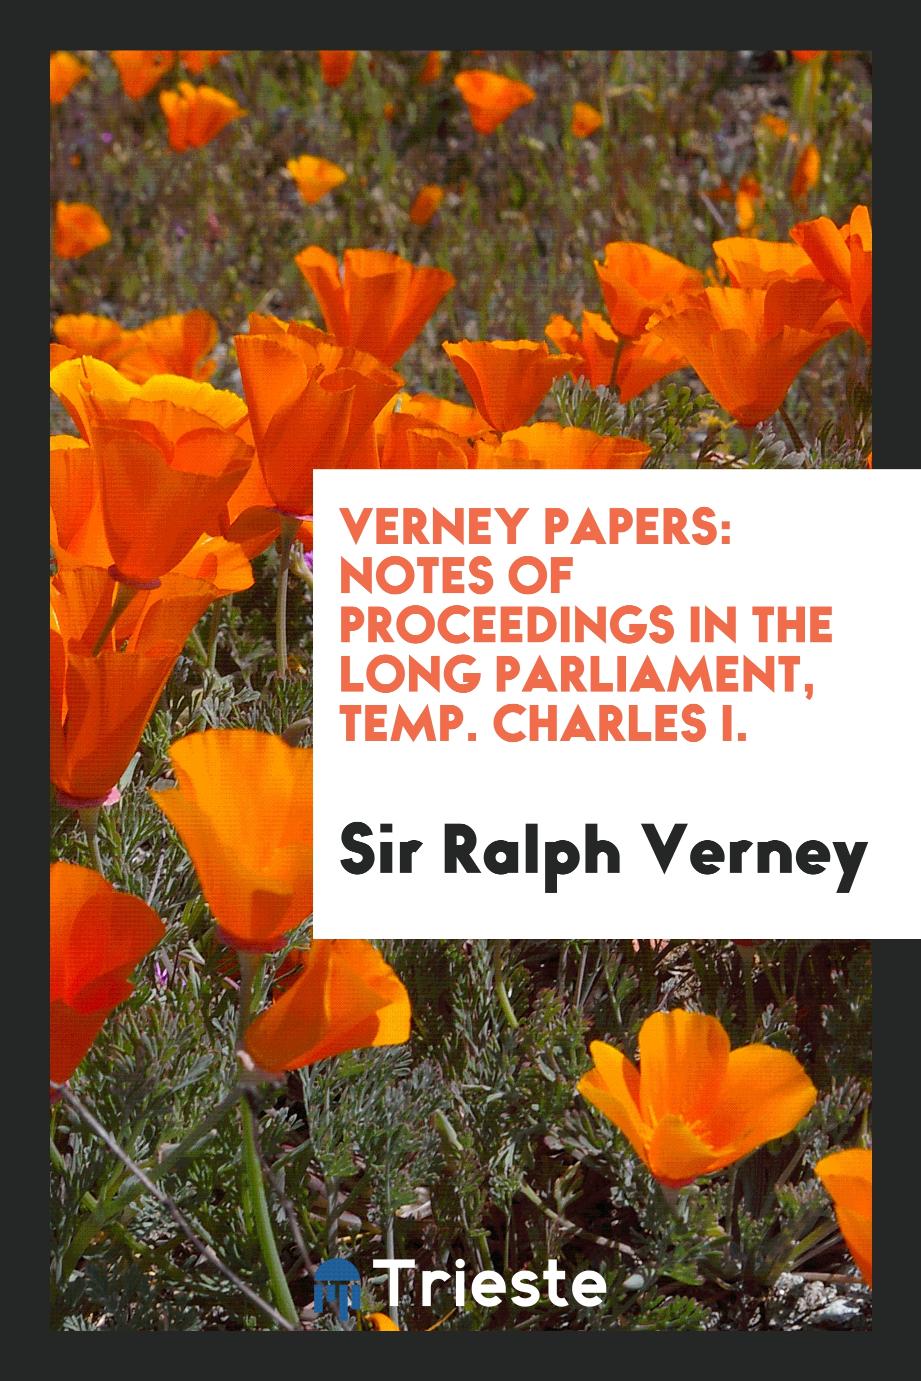 Verney Papers: Notes of Proceedings in the Long Parliament, Temp. Charles I.